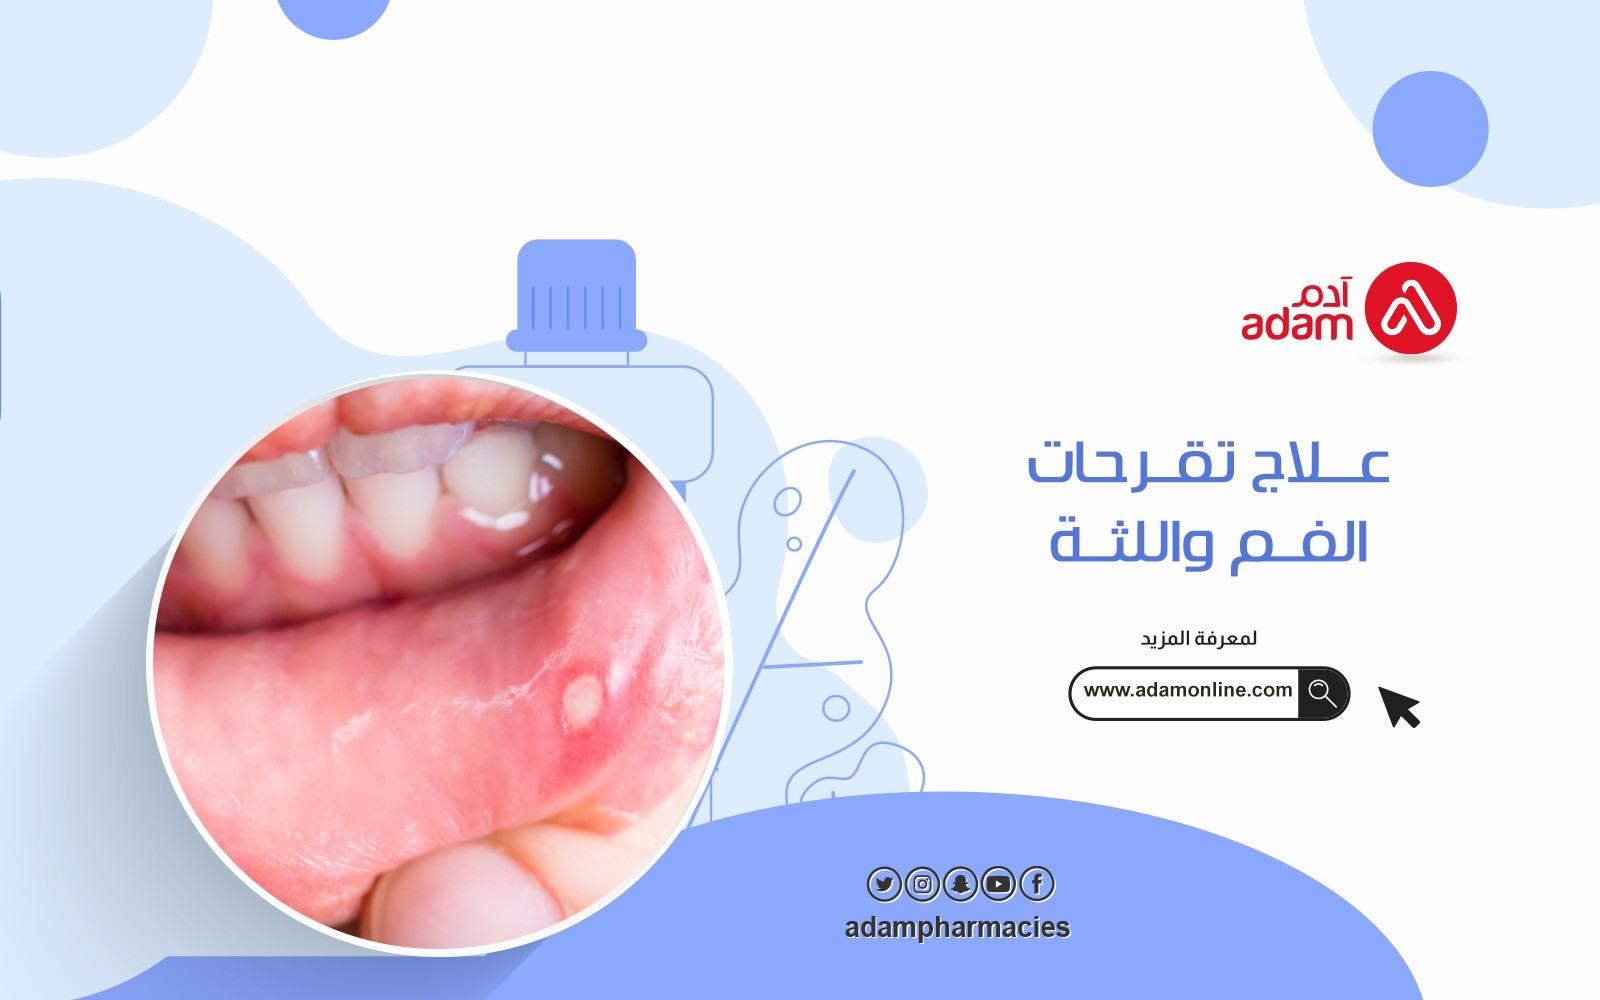 Mouth and gum ulcers treatment